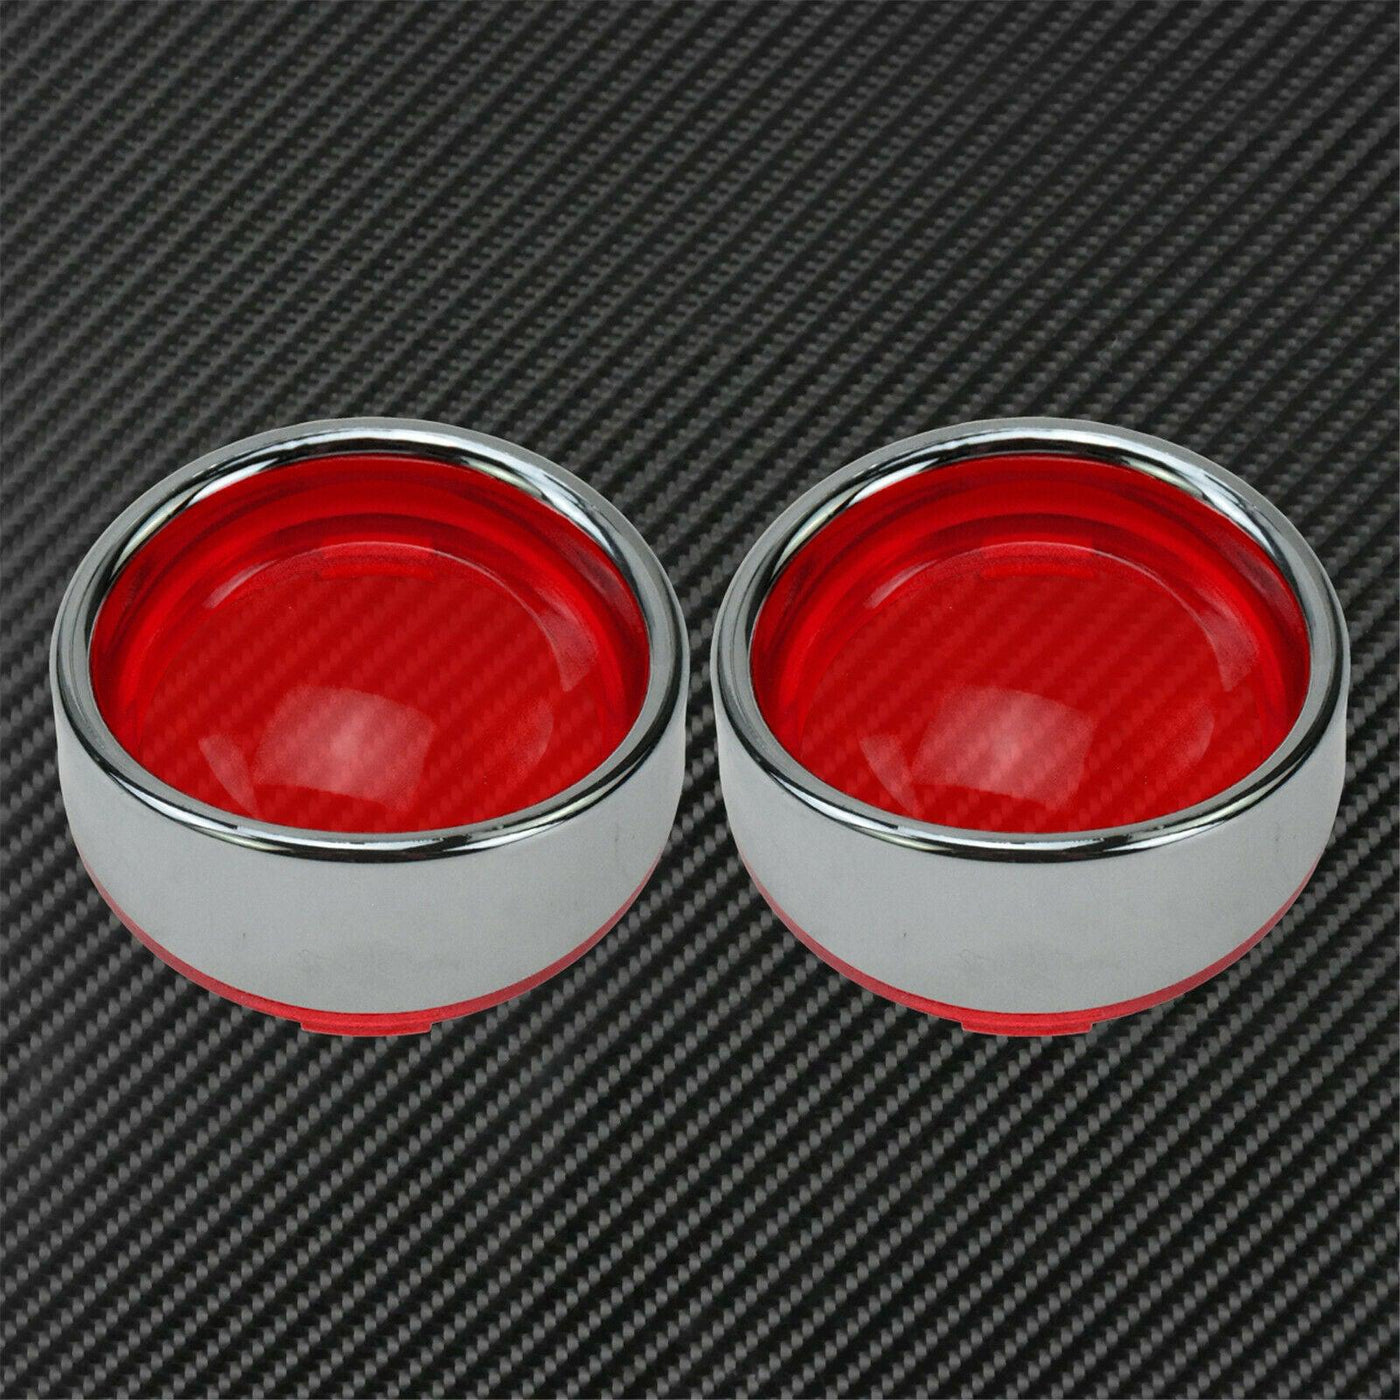 Chrome&Red Turn Signal Lens Cover Visor Ring Fit For Harley Softail Sportster - Moto Life Products